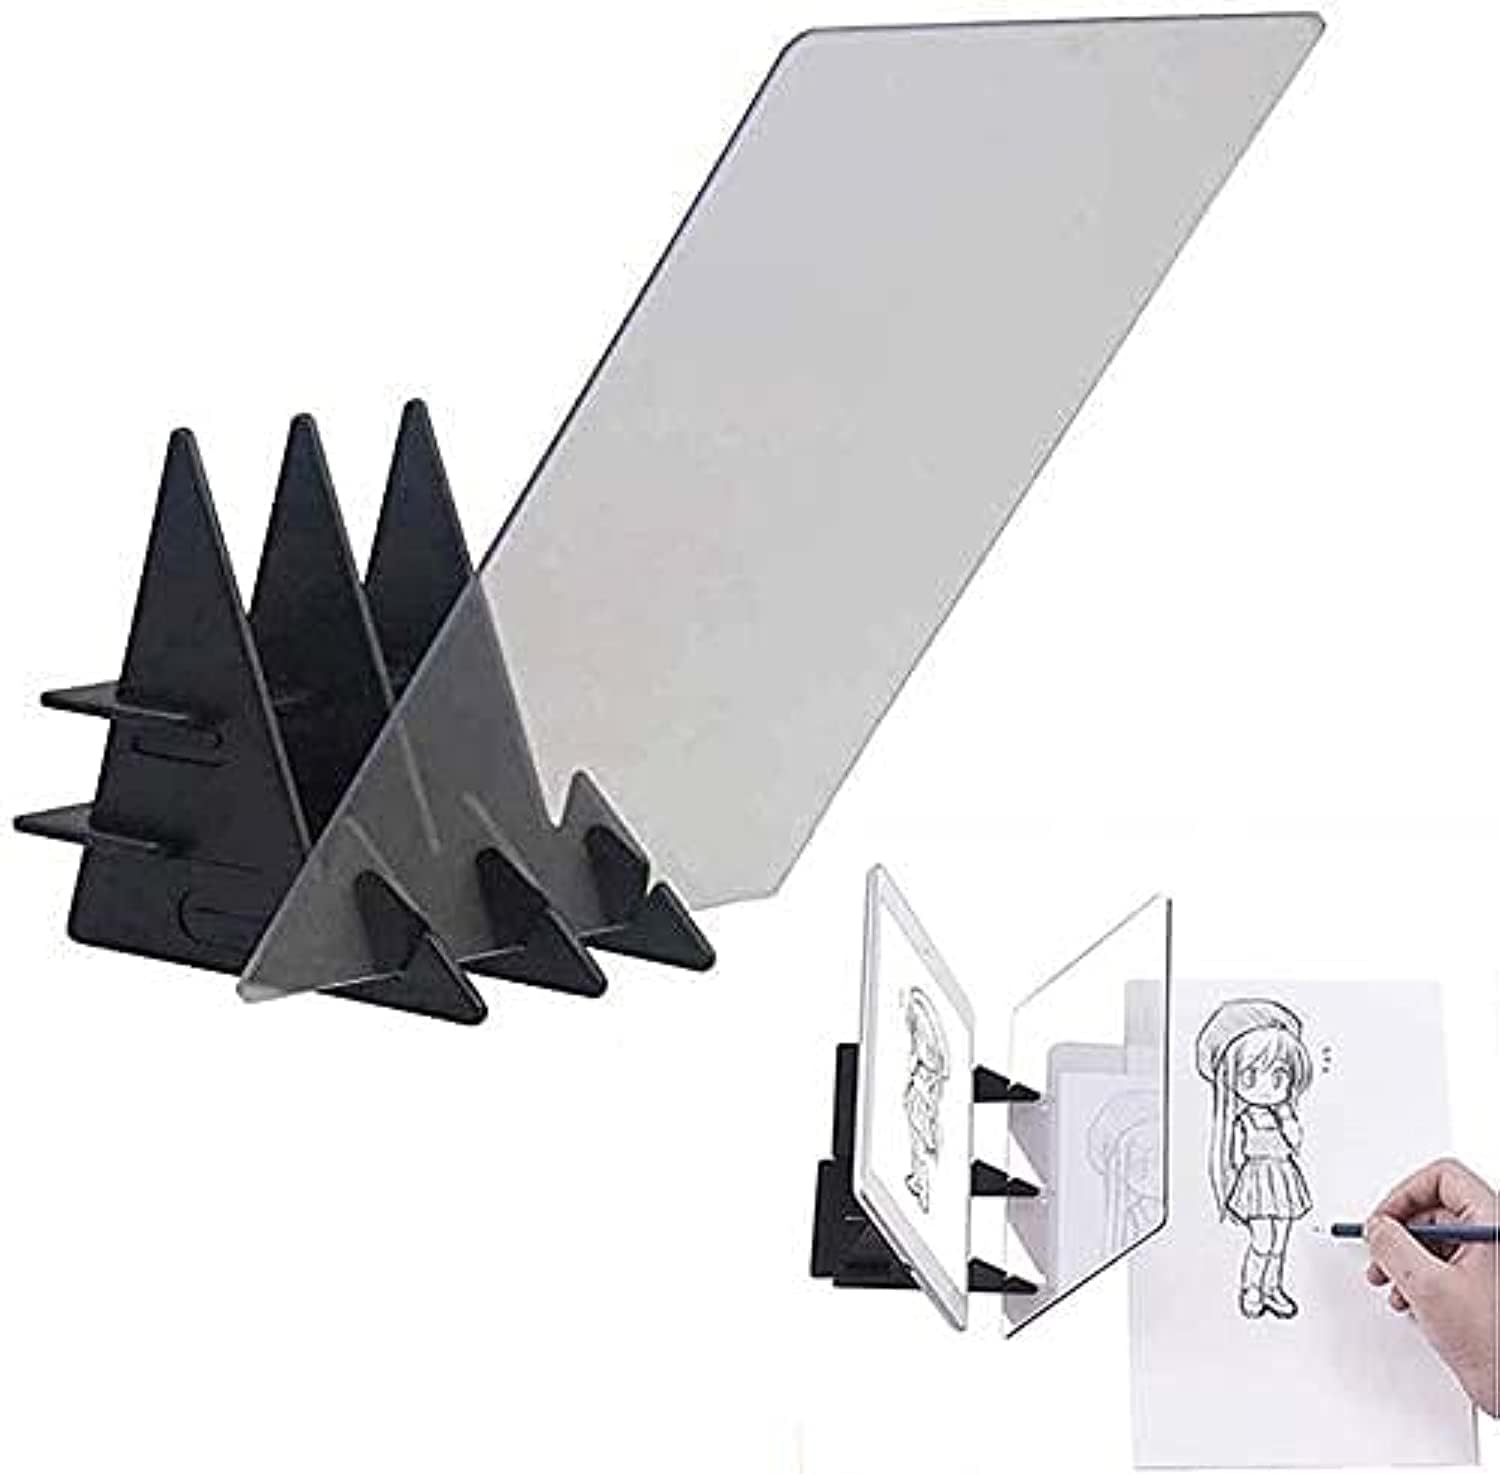 Portable Optical Drawing Board Sketching Tool Upgraded [...]